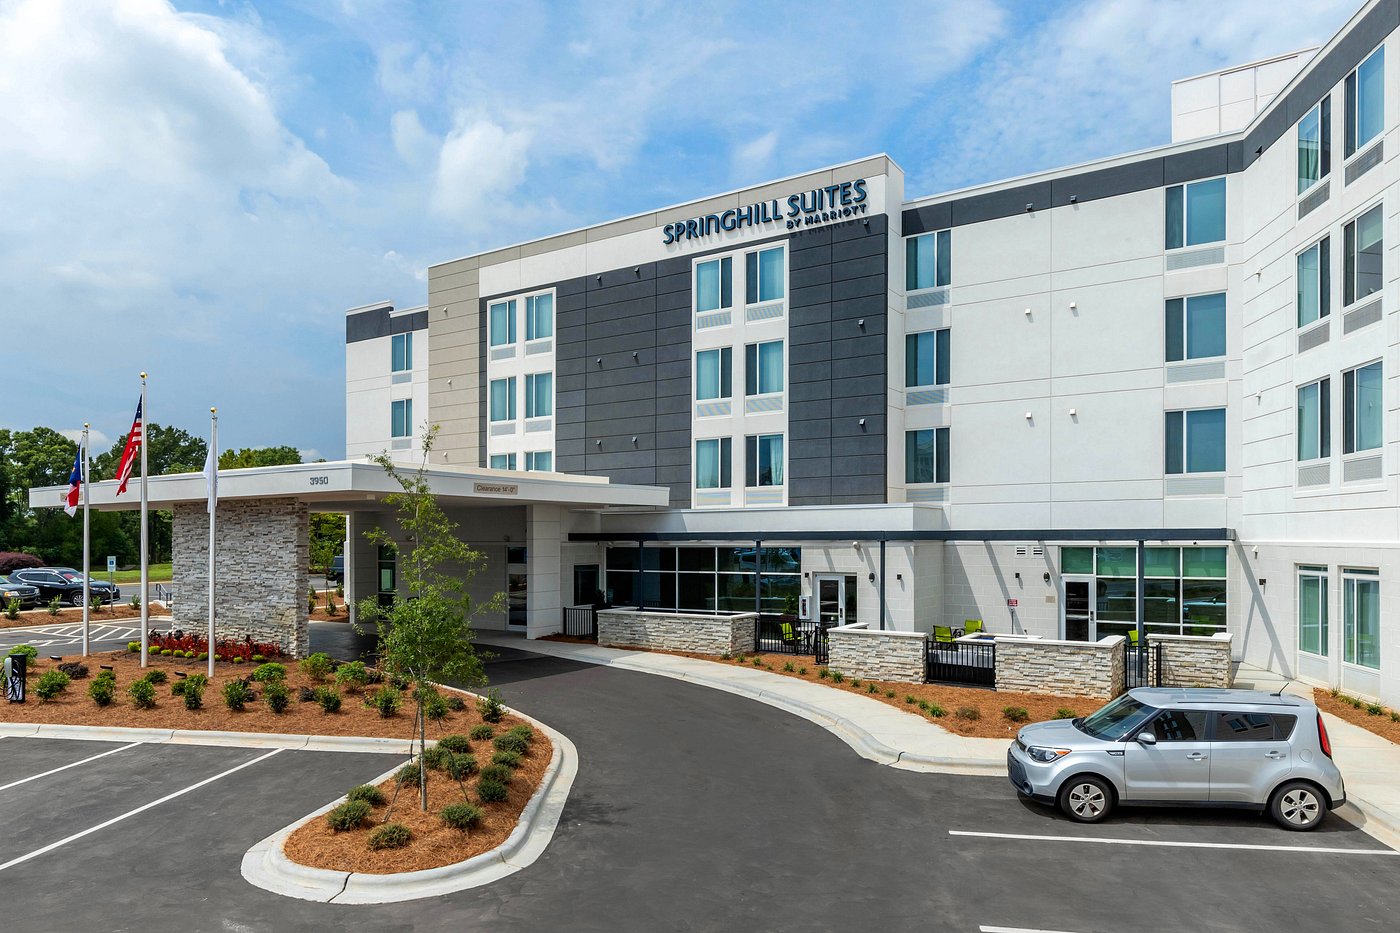 SPRINGHILL SUITES BY MARRIOTT CHARLOTTE SOUTHWEST (Charlotte NC